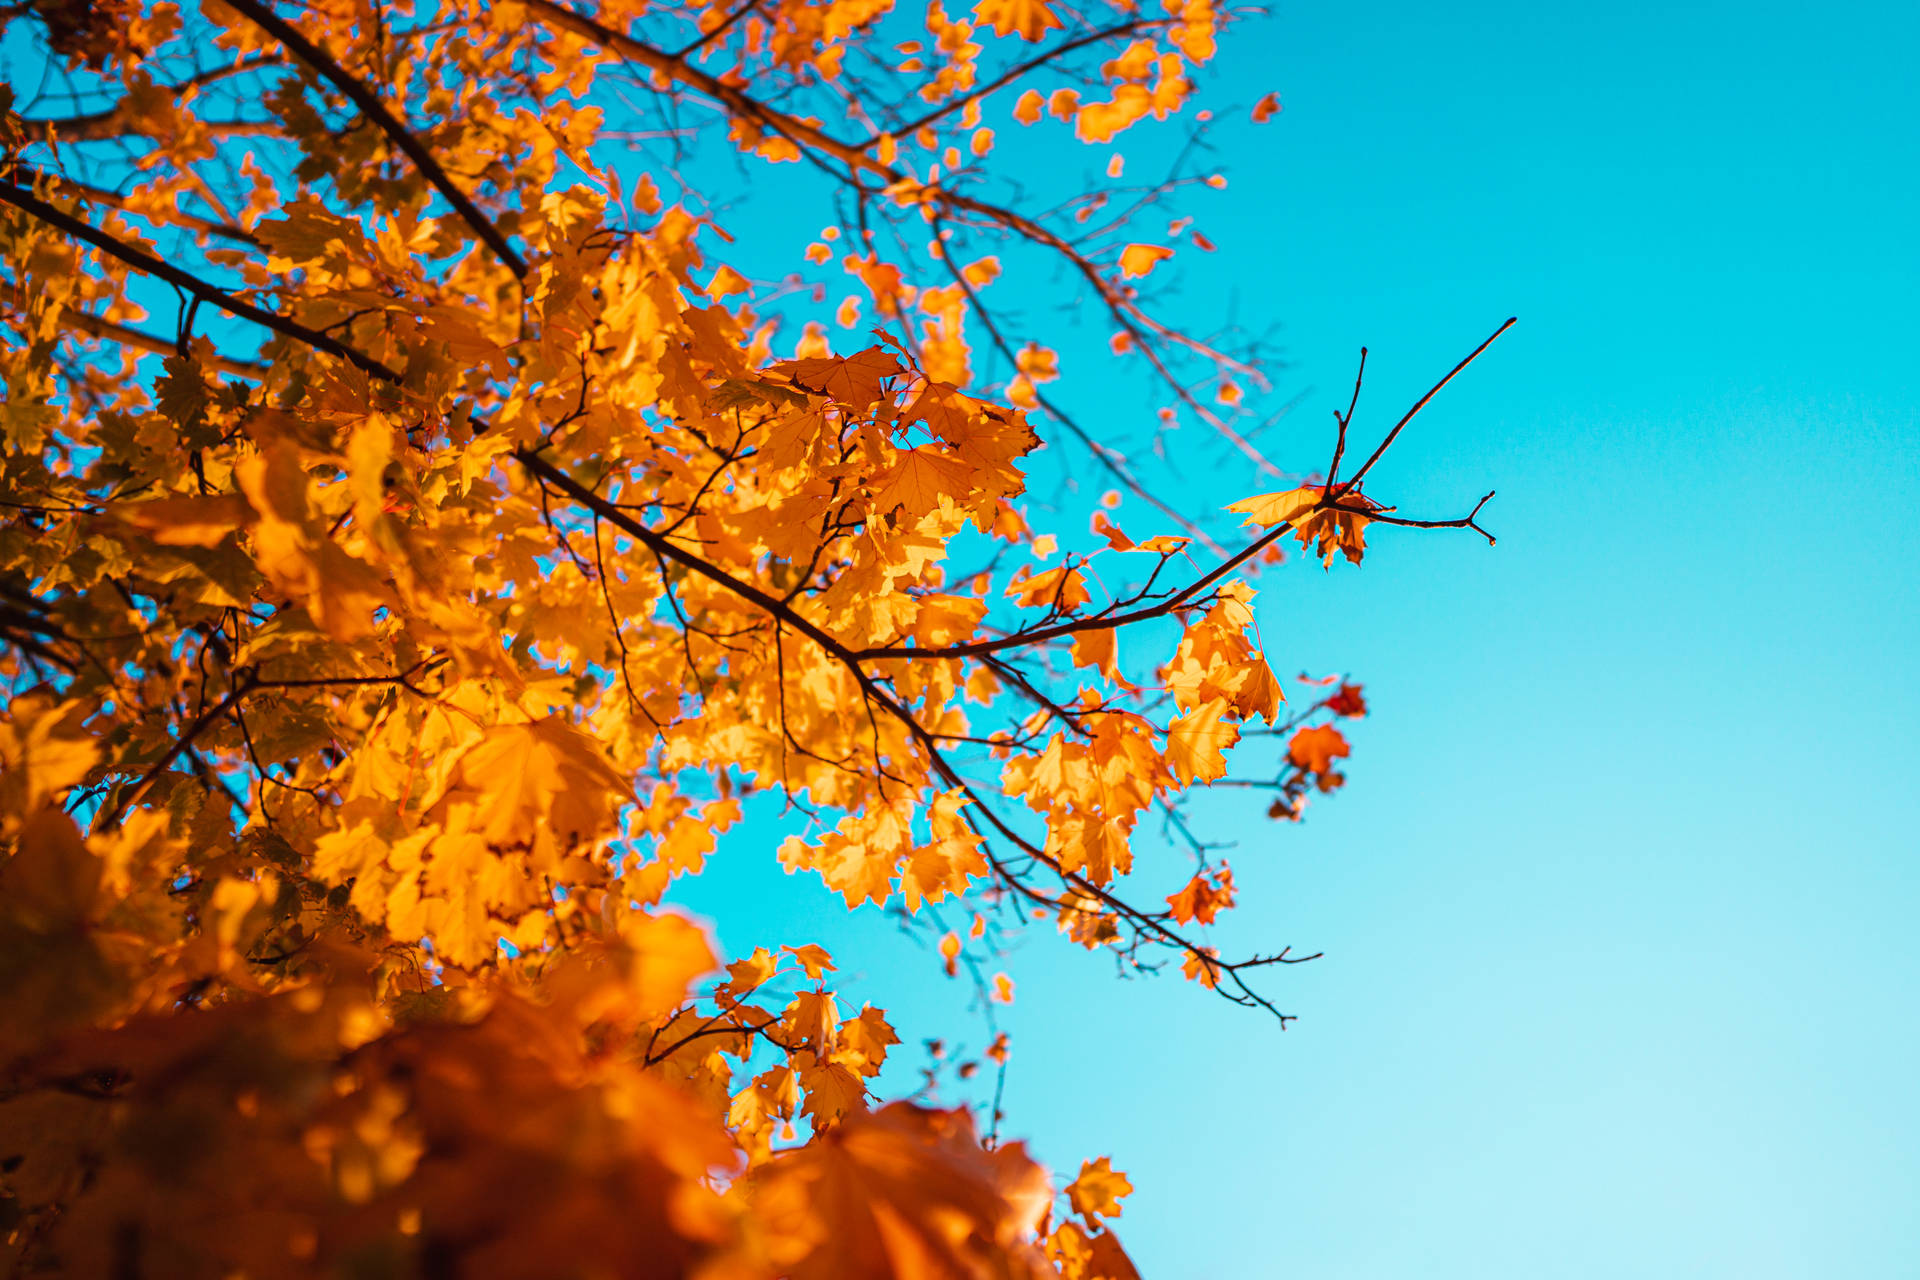 Aesthetic Sky And Autumn Leaves Wallpaper